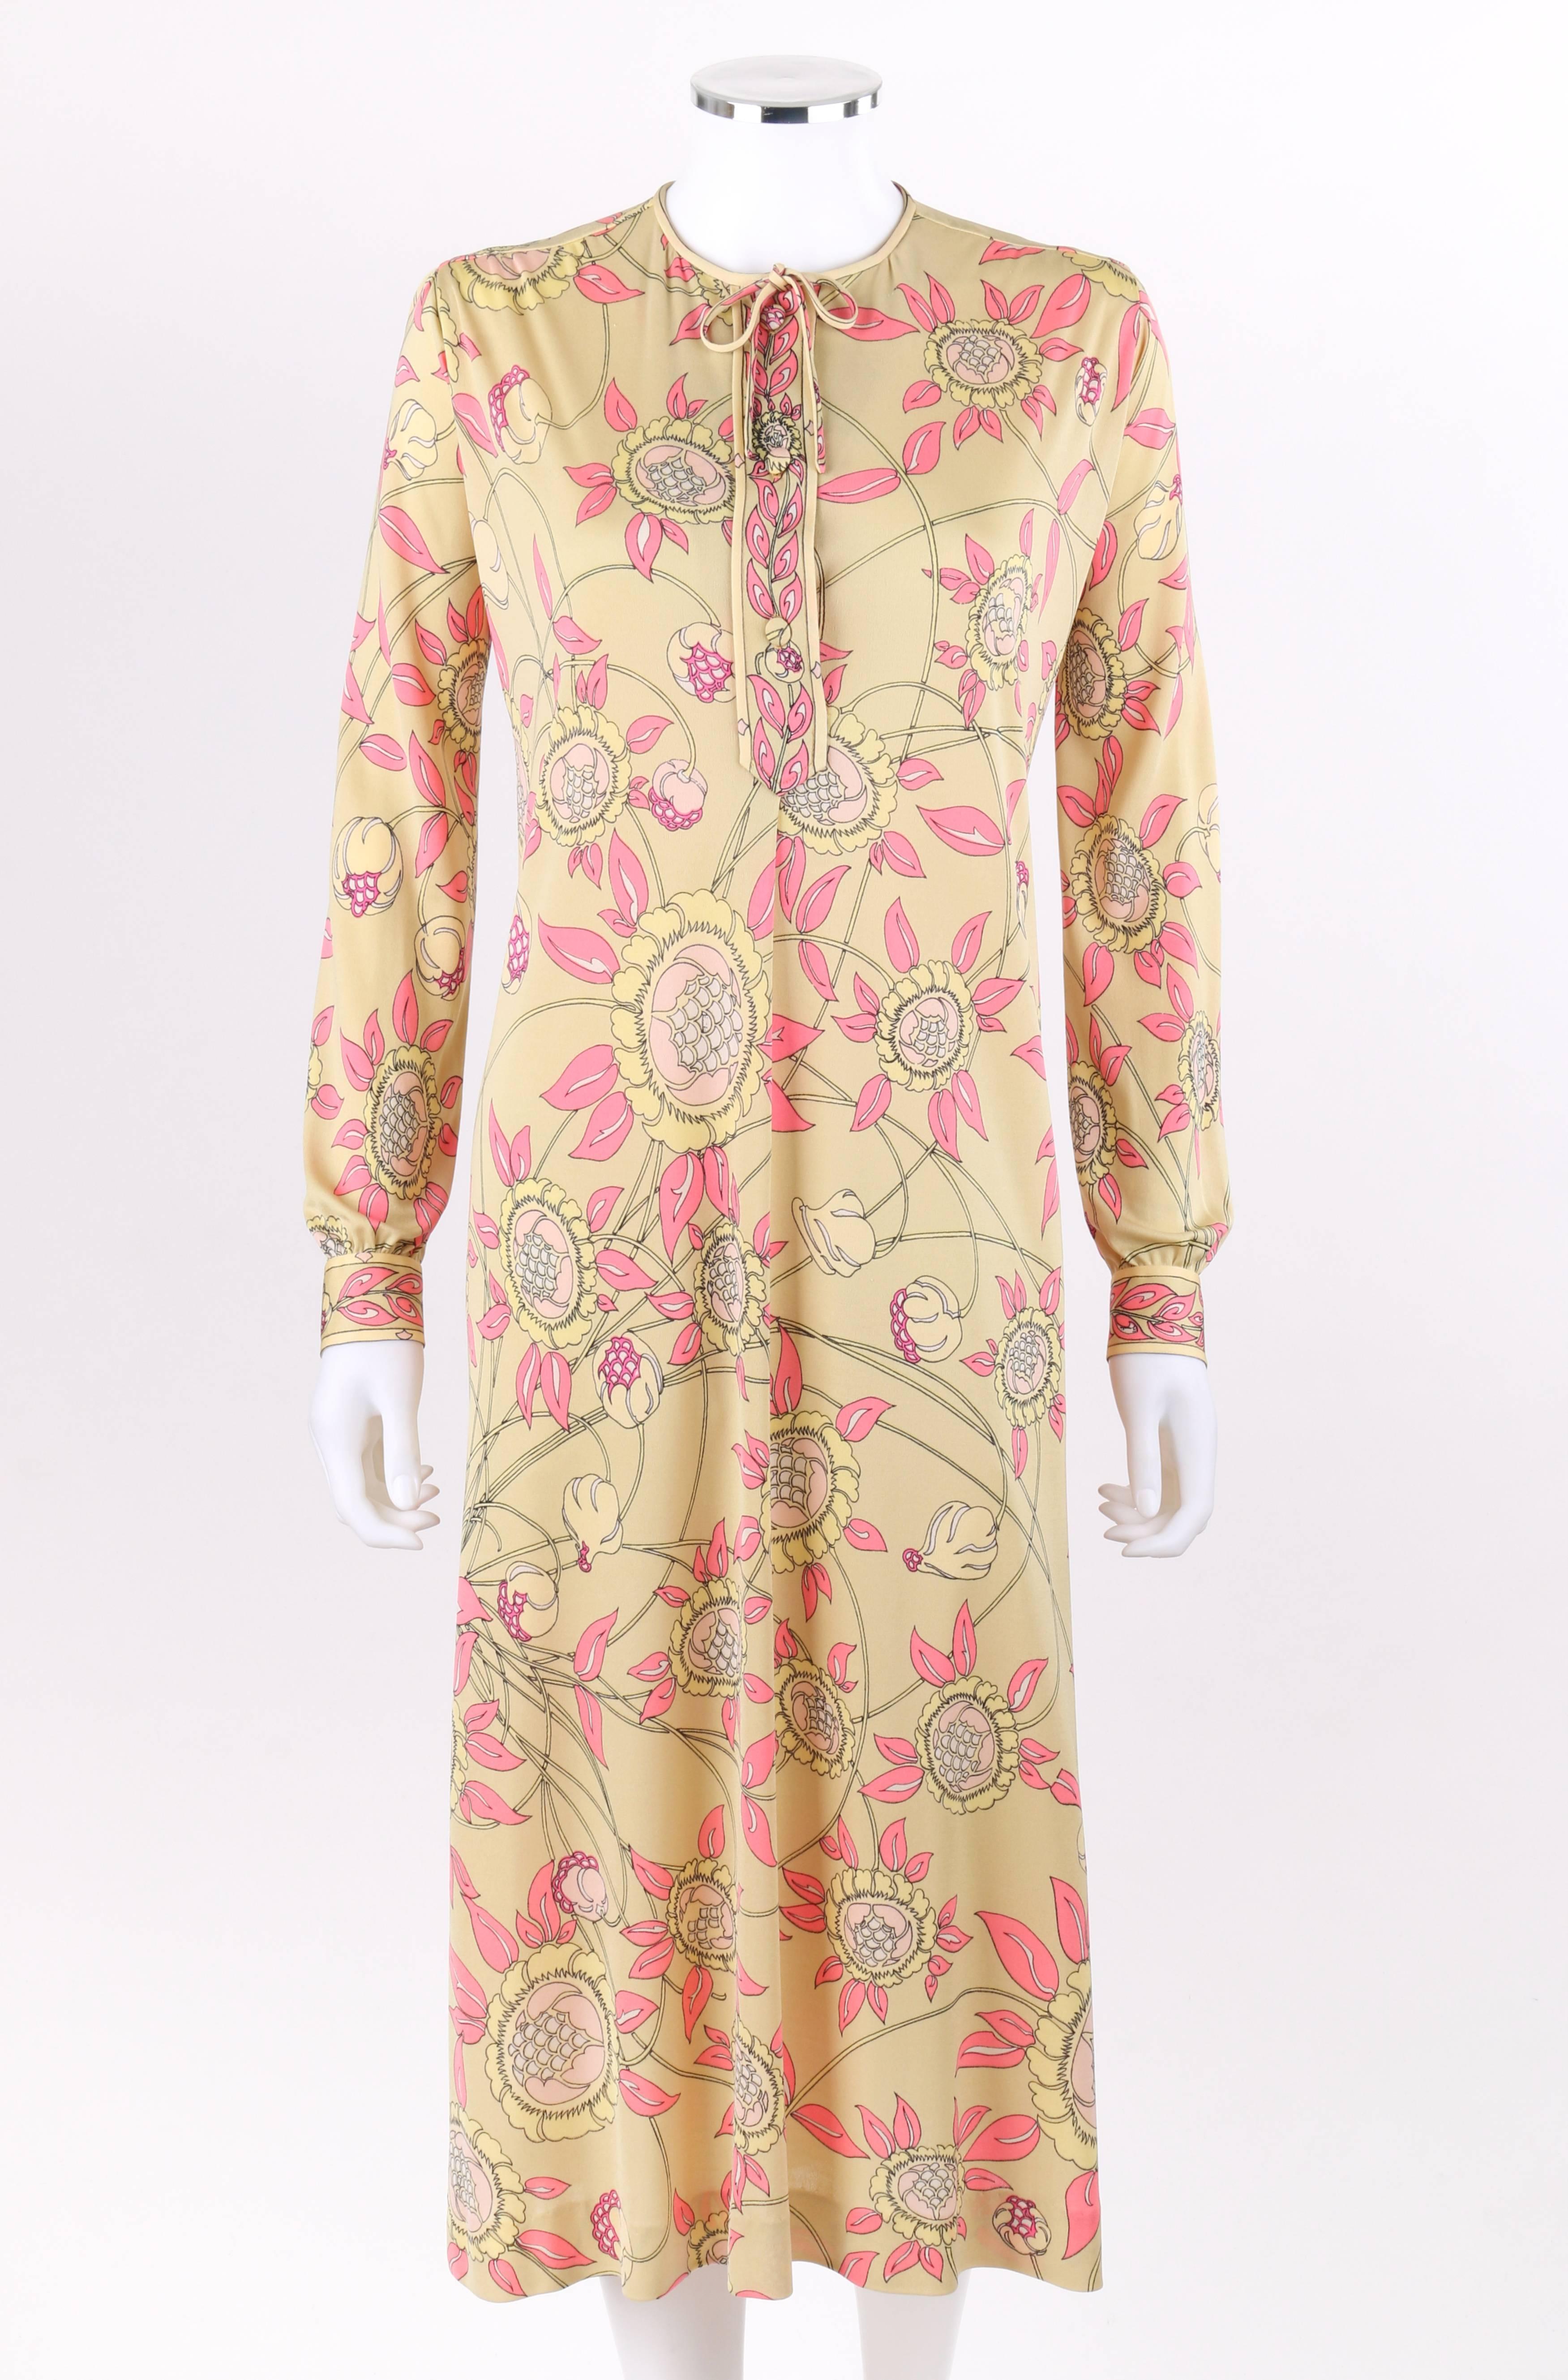 Vintage Emilio Pucci c.1970's floral signature print silk jersey shift dress with belt. Multi-color signature floral print in shades of beige, yellow, pink, and white. Matching floral boarder pint at center front and cuffs. Crew neckline with thin